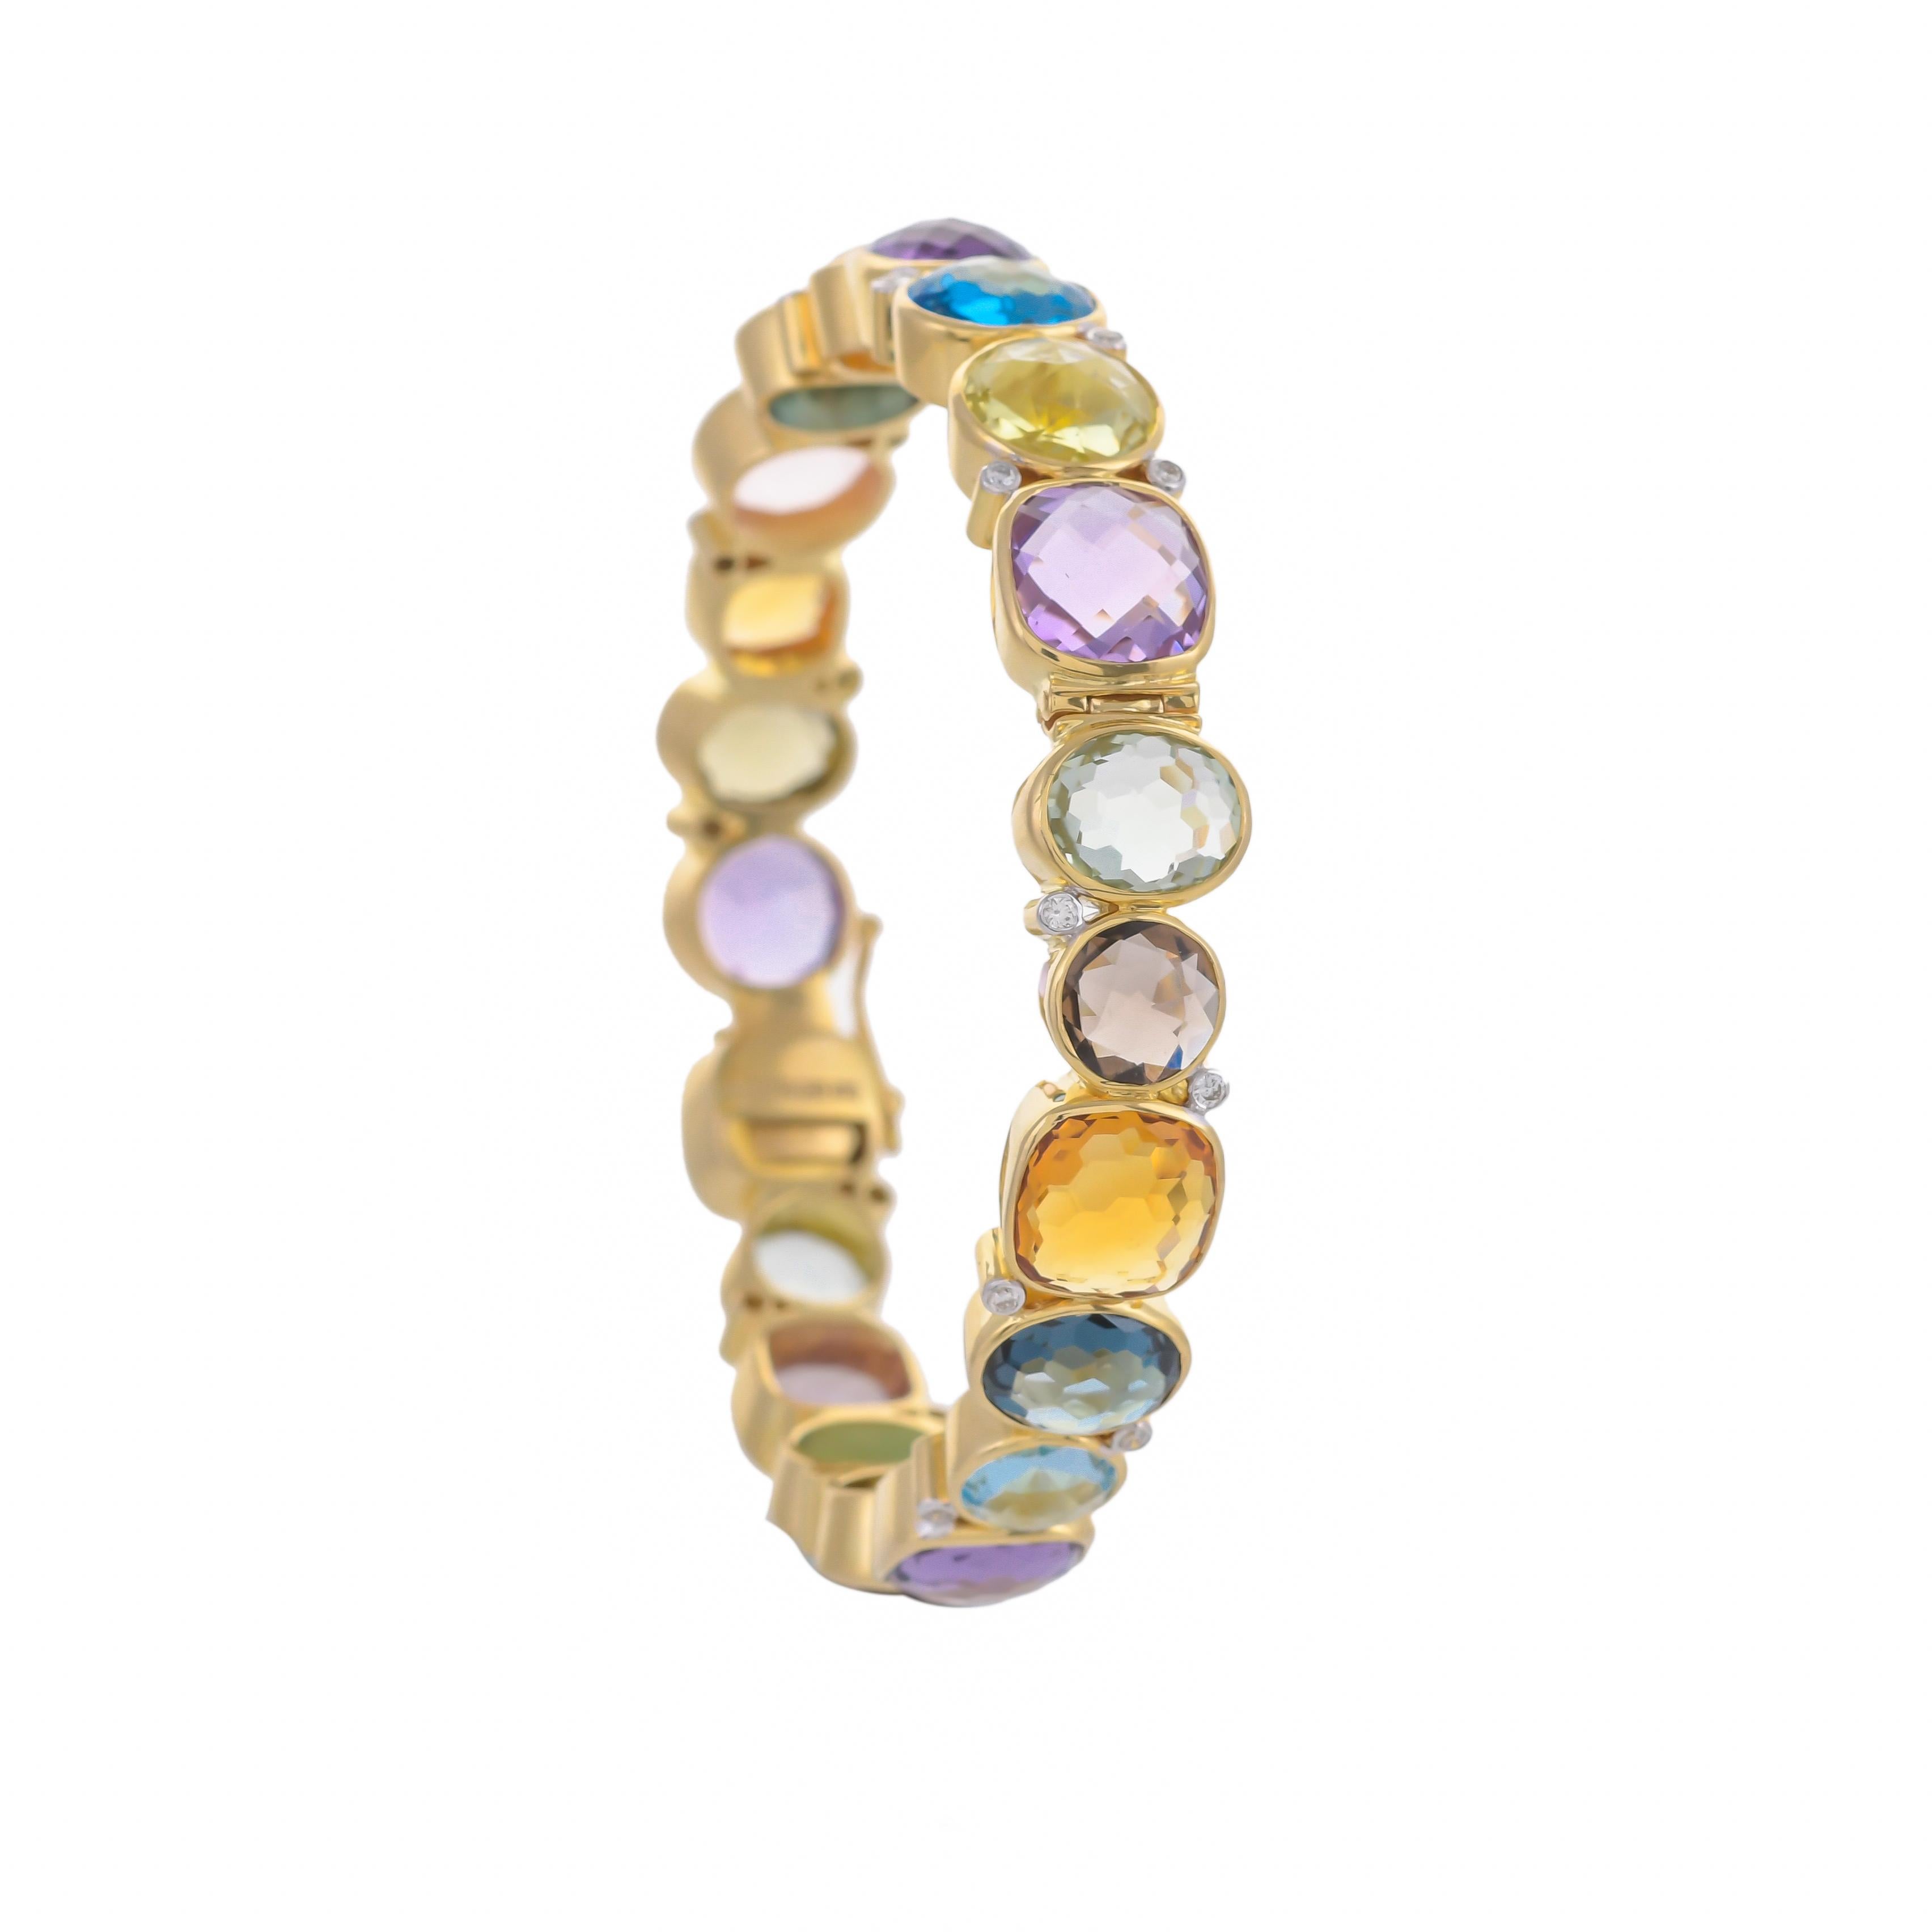 This statement bangle is styled with 54.96 carats multi-colored briolette which are meticulously set in 18 karats yellow gold, further enhanced with vertically set 0.41 carats white diamonds highlights the beauty of this chic yet timeless piece.
Art